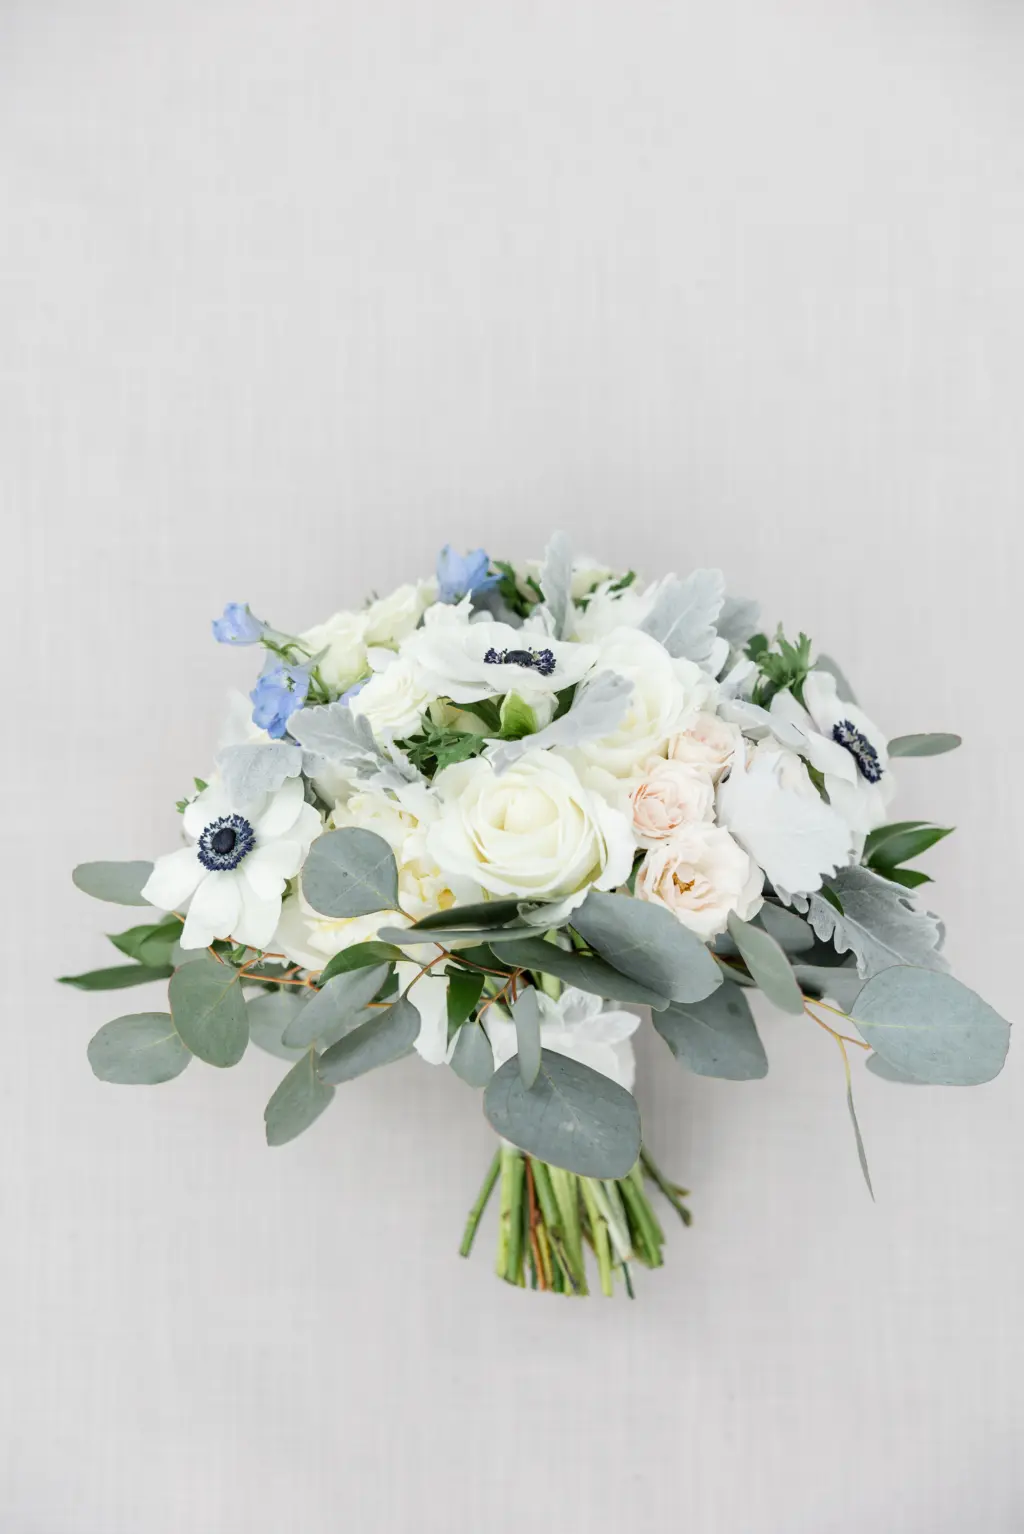 White Anemone, Blush Roses, Blue Flowers, and Greenery Wedding Bouquet Ideas | Tampa Bay Florist Monarch Events and Design